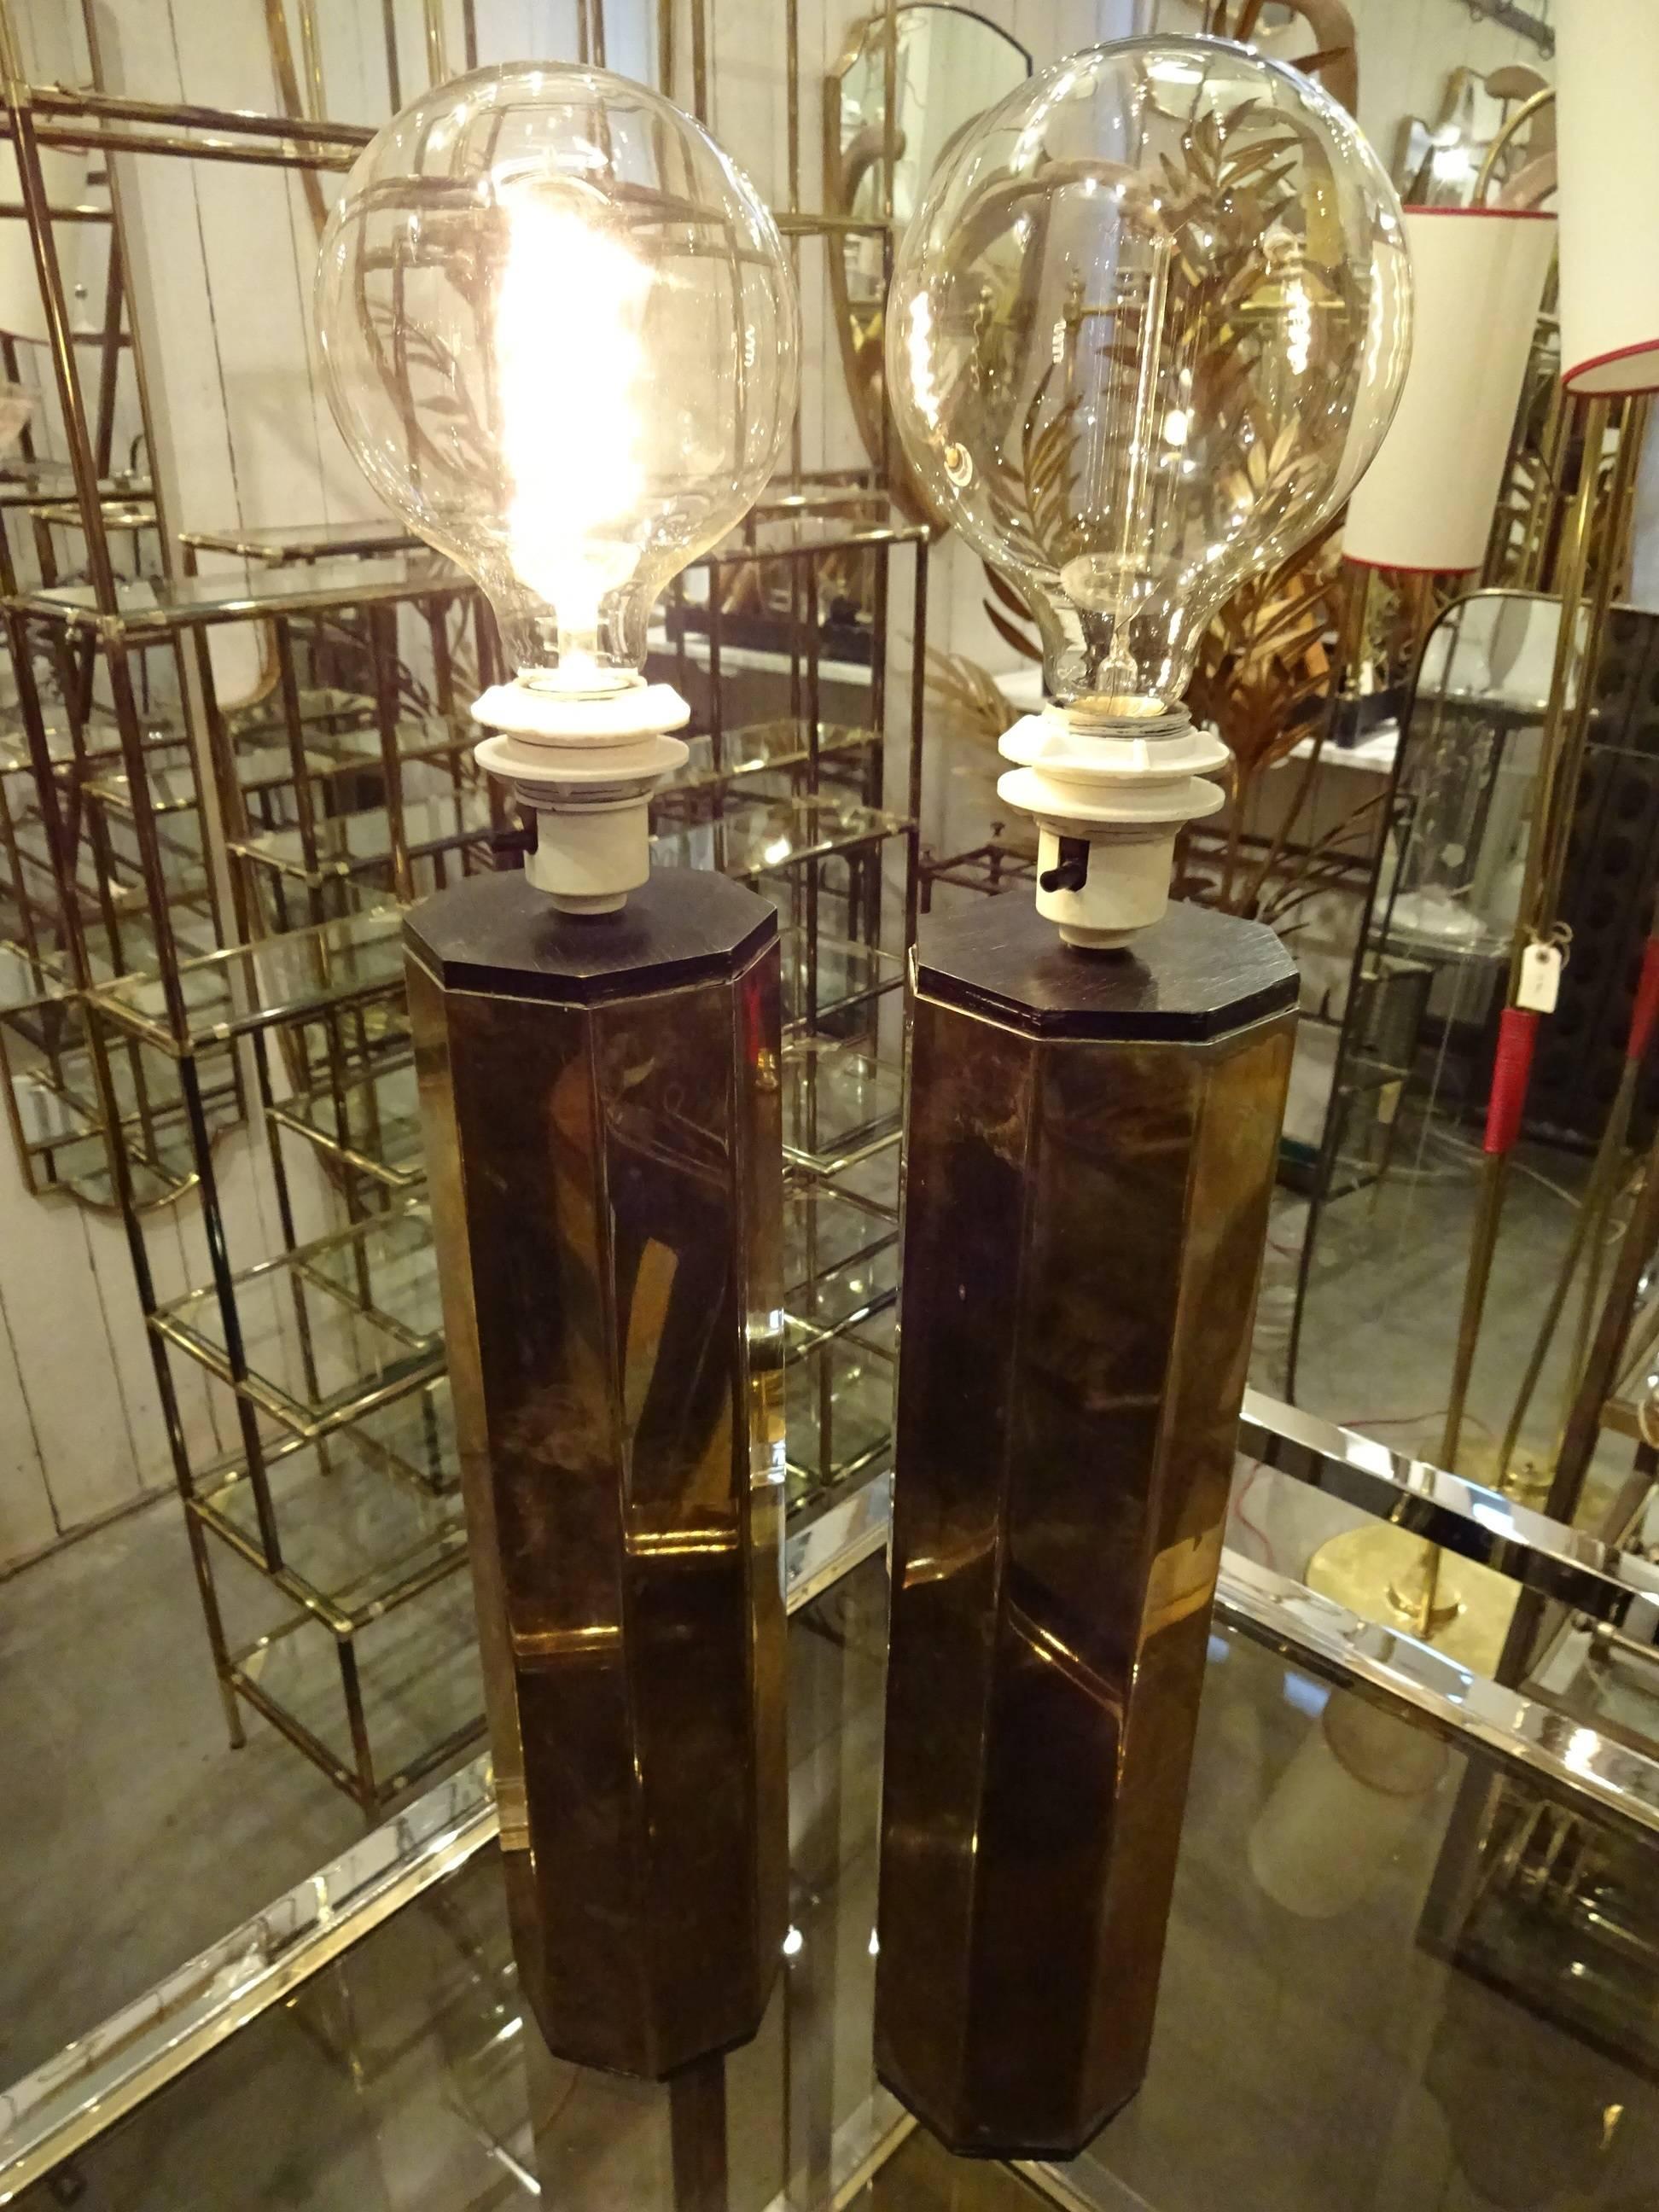 Wonderful and very rare pair of vintage octagonal brass table lamps. Designed by Swedish Hans-Agne Jakobsson, Markaryd Sweden. Model no. B203/36, circa 1960s. The bases and tops are in dark stained wood. In super vintage condition with only small